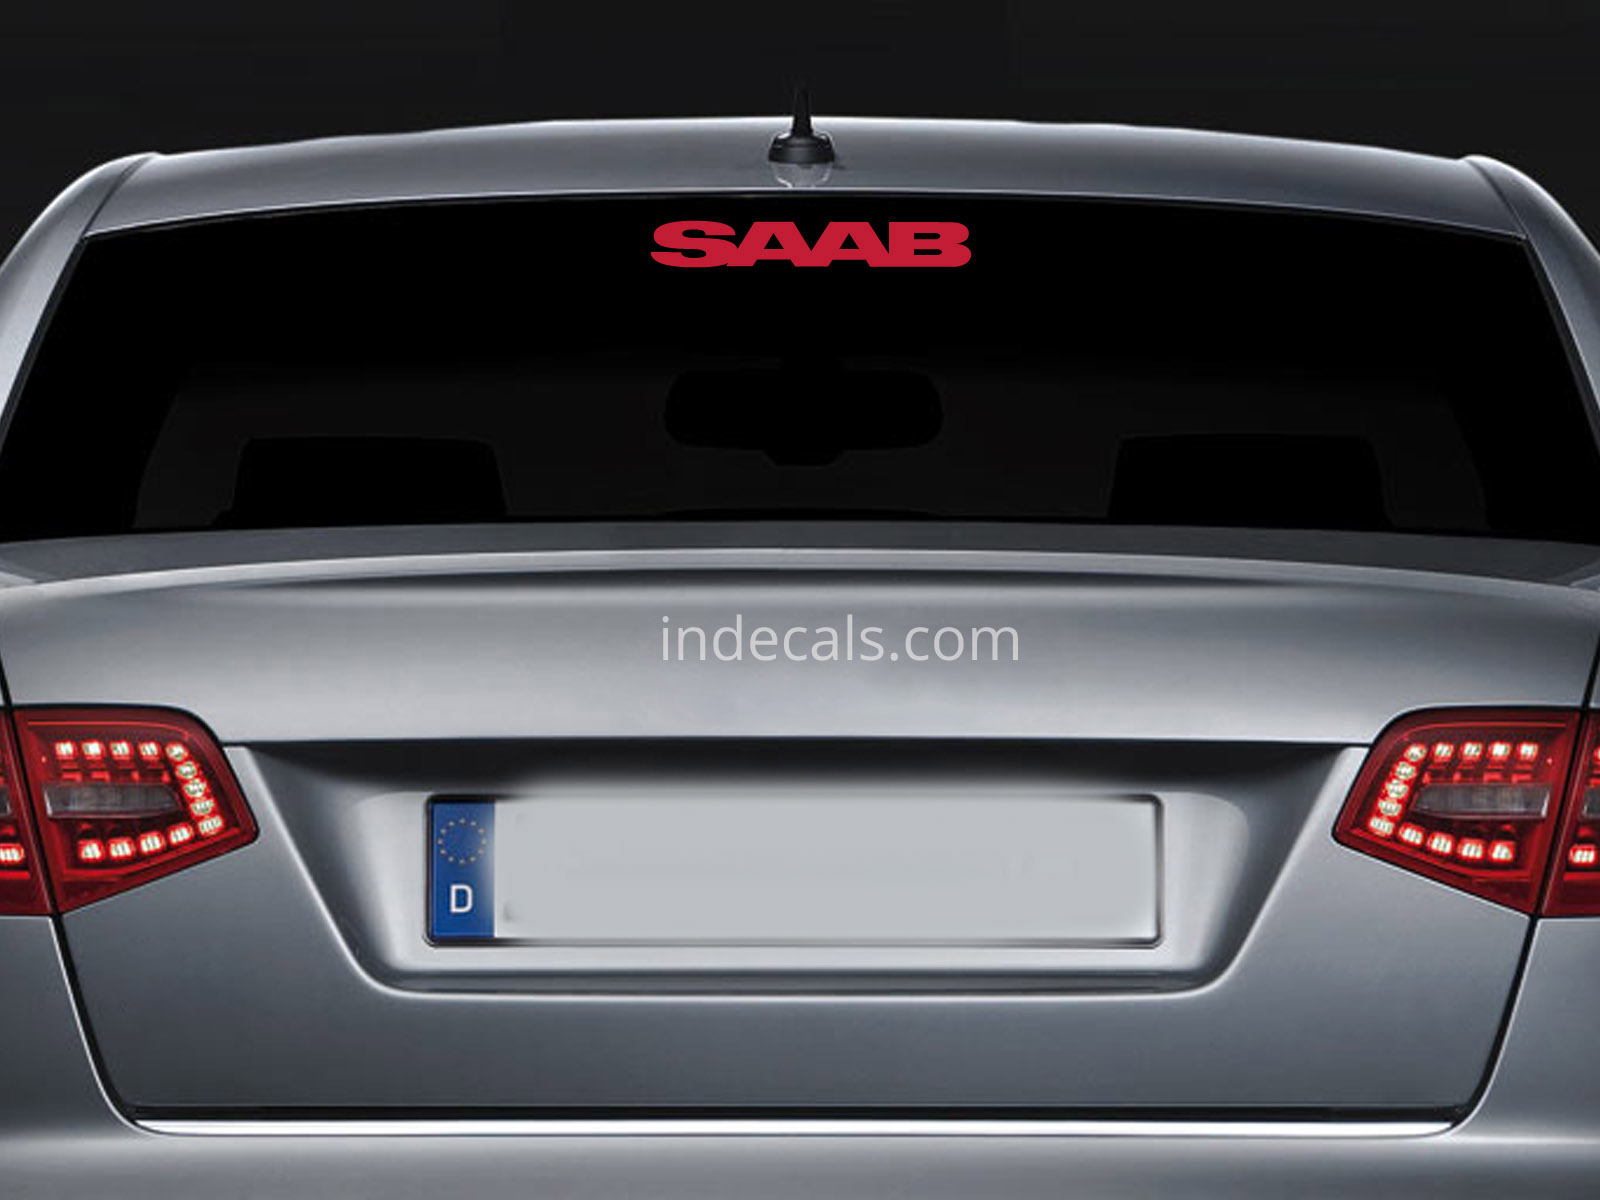 1 x Saab Sticker for Windshield or Back Window - Red